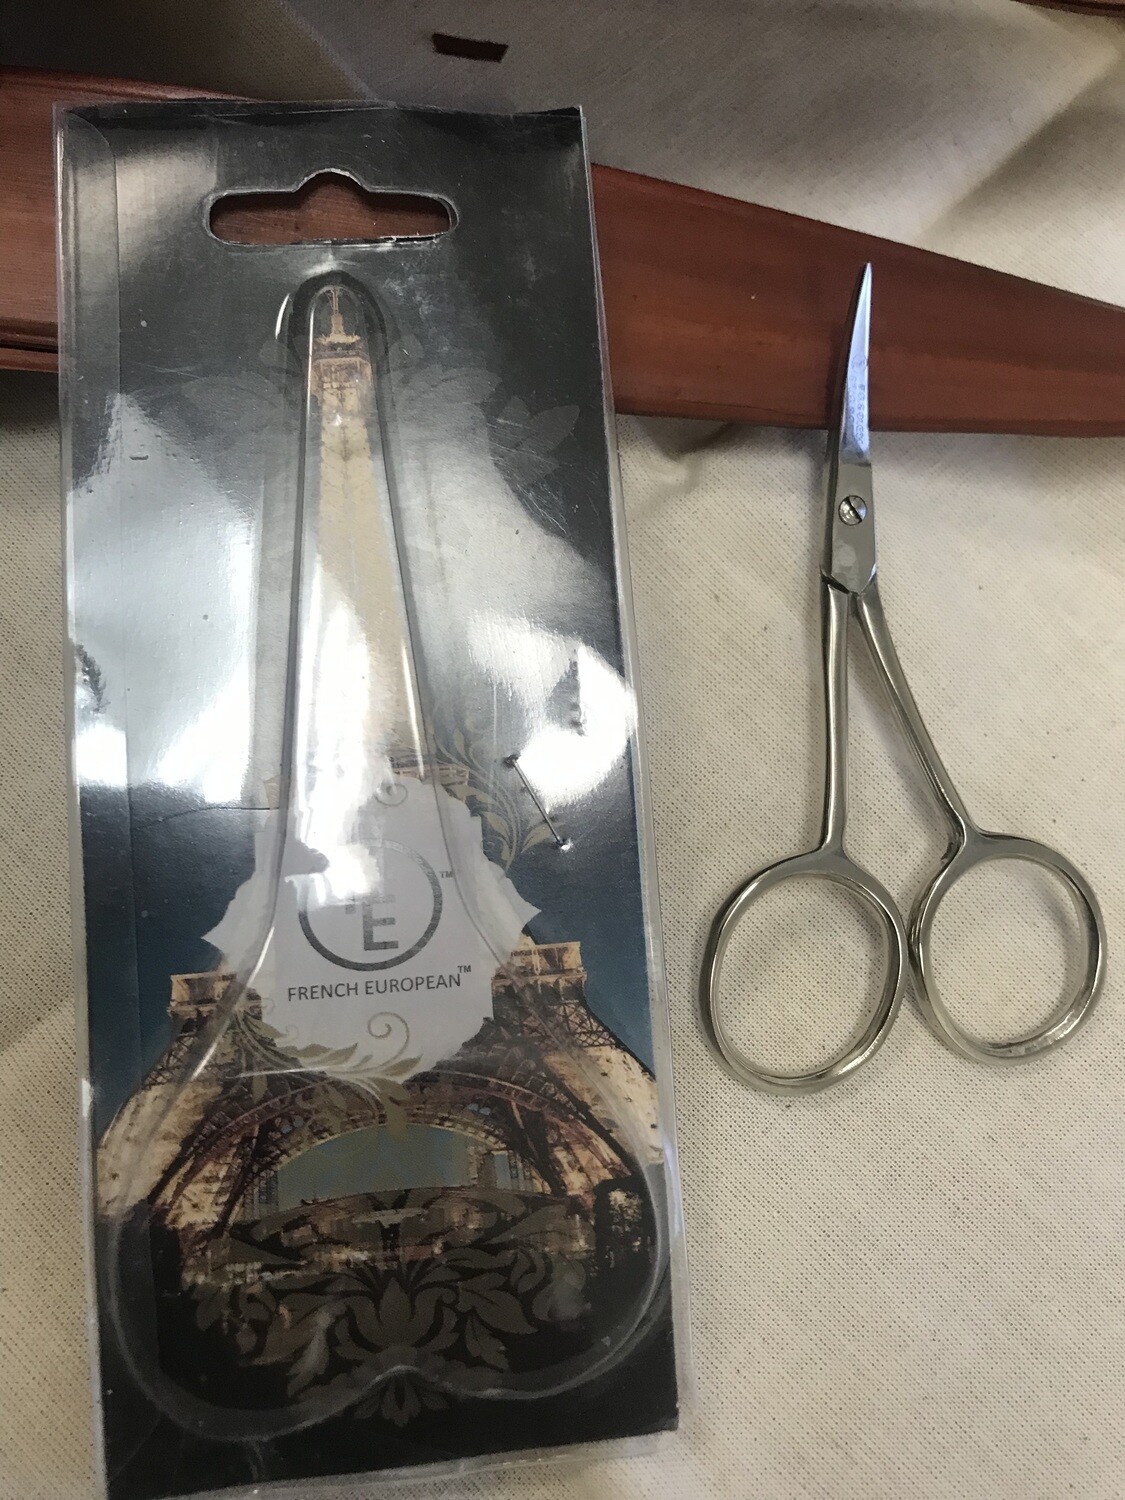 SINGLE CURVED 6" NICKEL METAL EMBROIDERY SCISSORS | French European